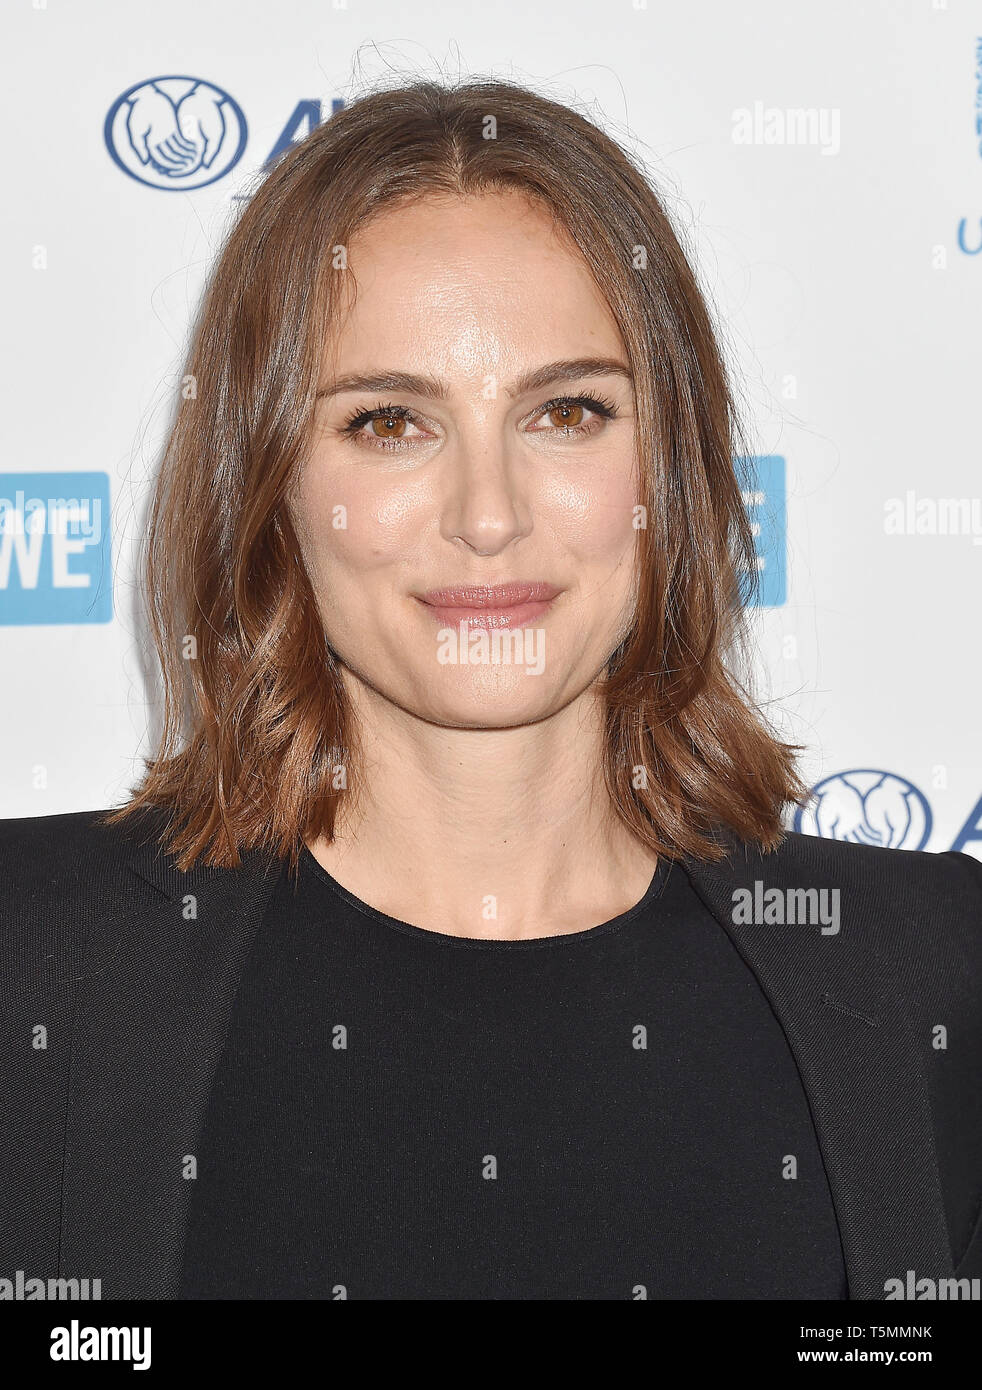 INGLEWOOD, CA - APRIL 25: Natalie Portman  arrives at the WE Day California 2019 at The Forum on April 25, 2019 in Inglewood, California. Stock Photo